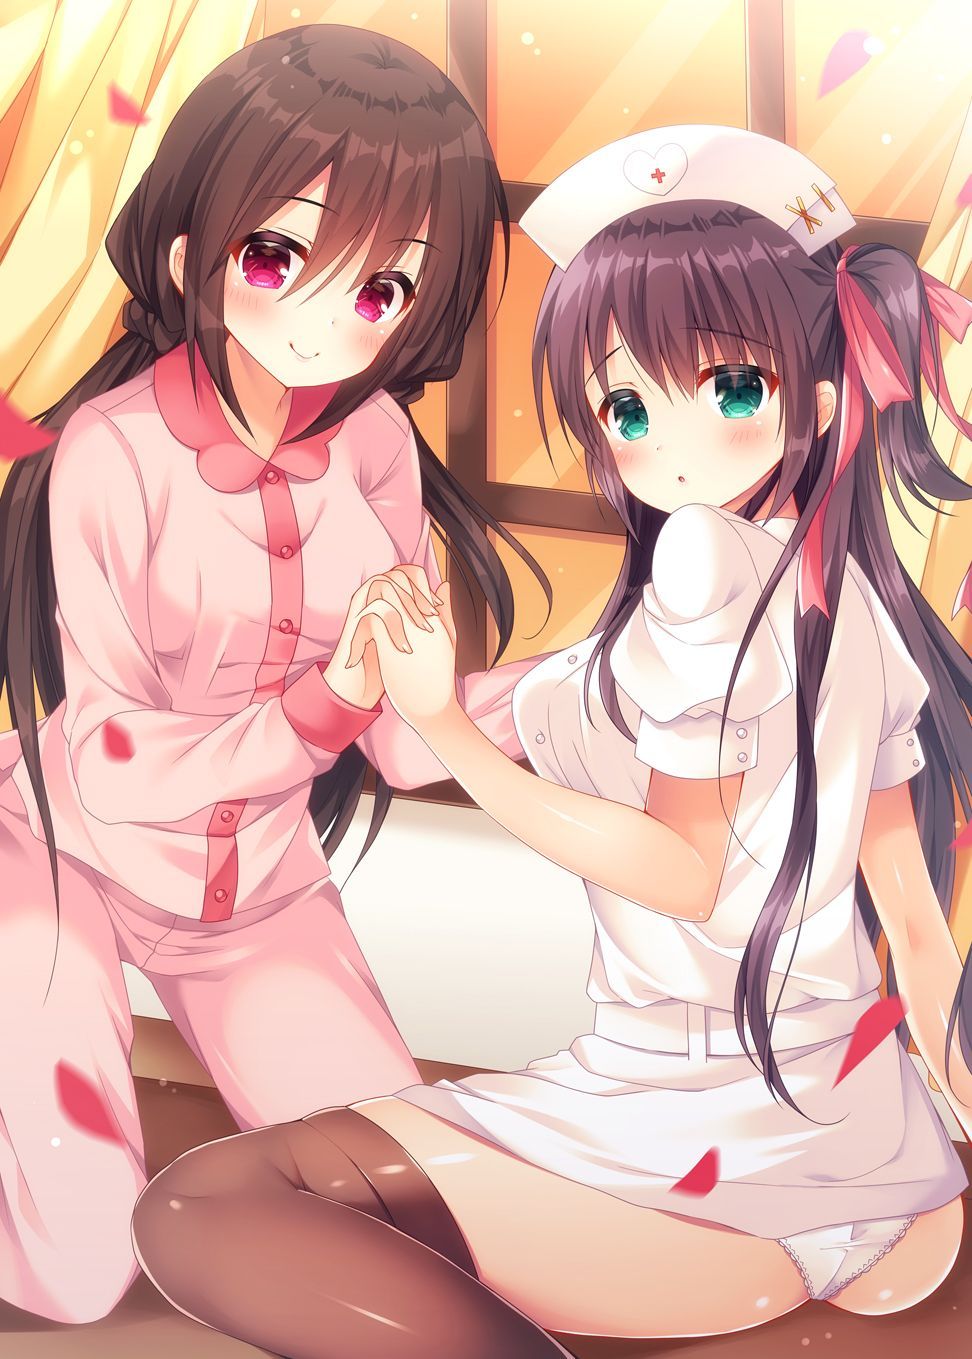 【Erotic Anime Summary】 The cutest erotic images of lesbian girls 【Secondary erotica】 3